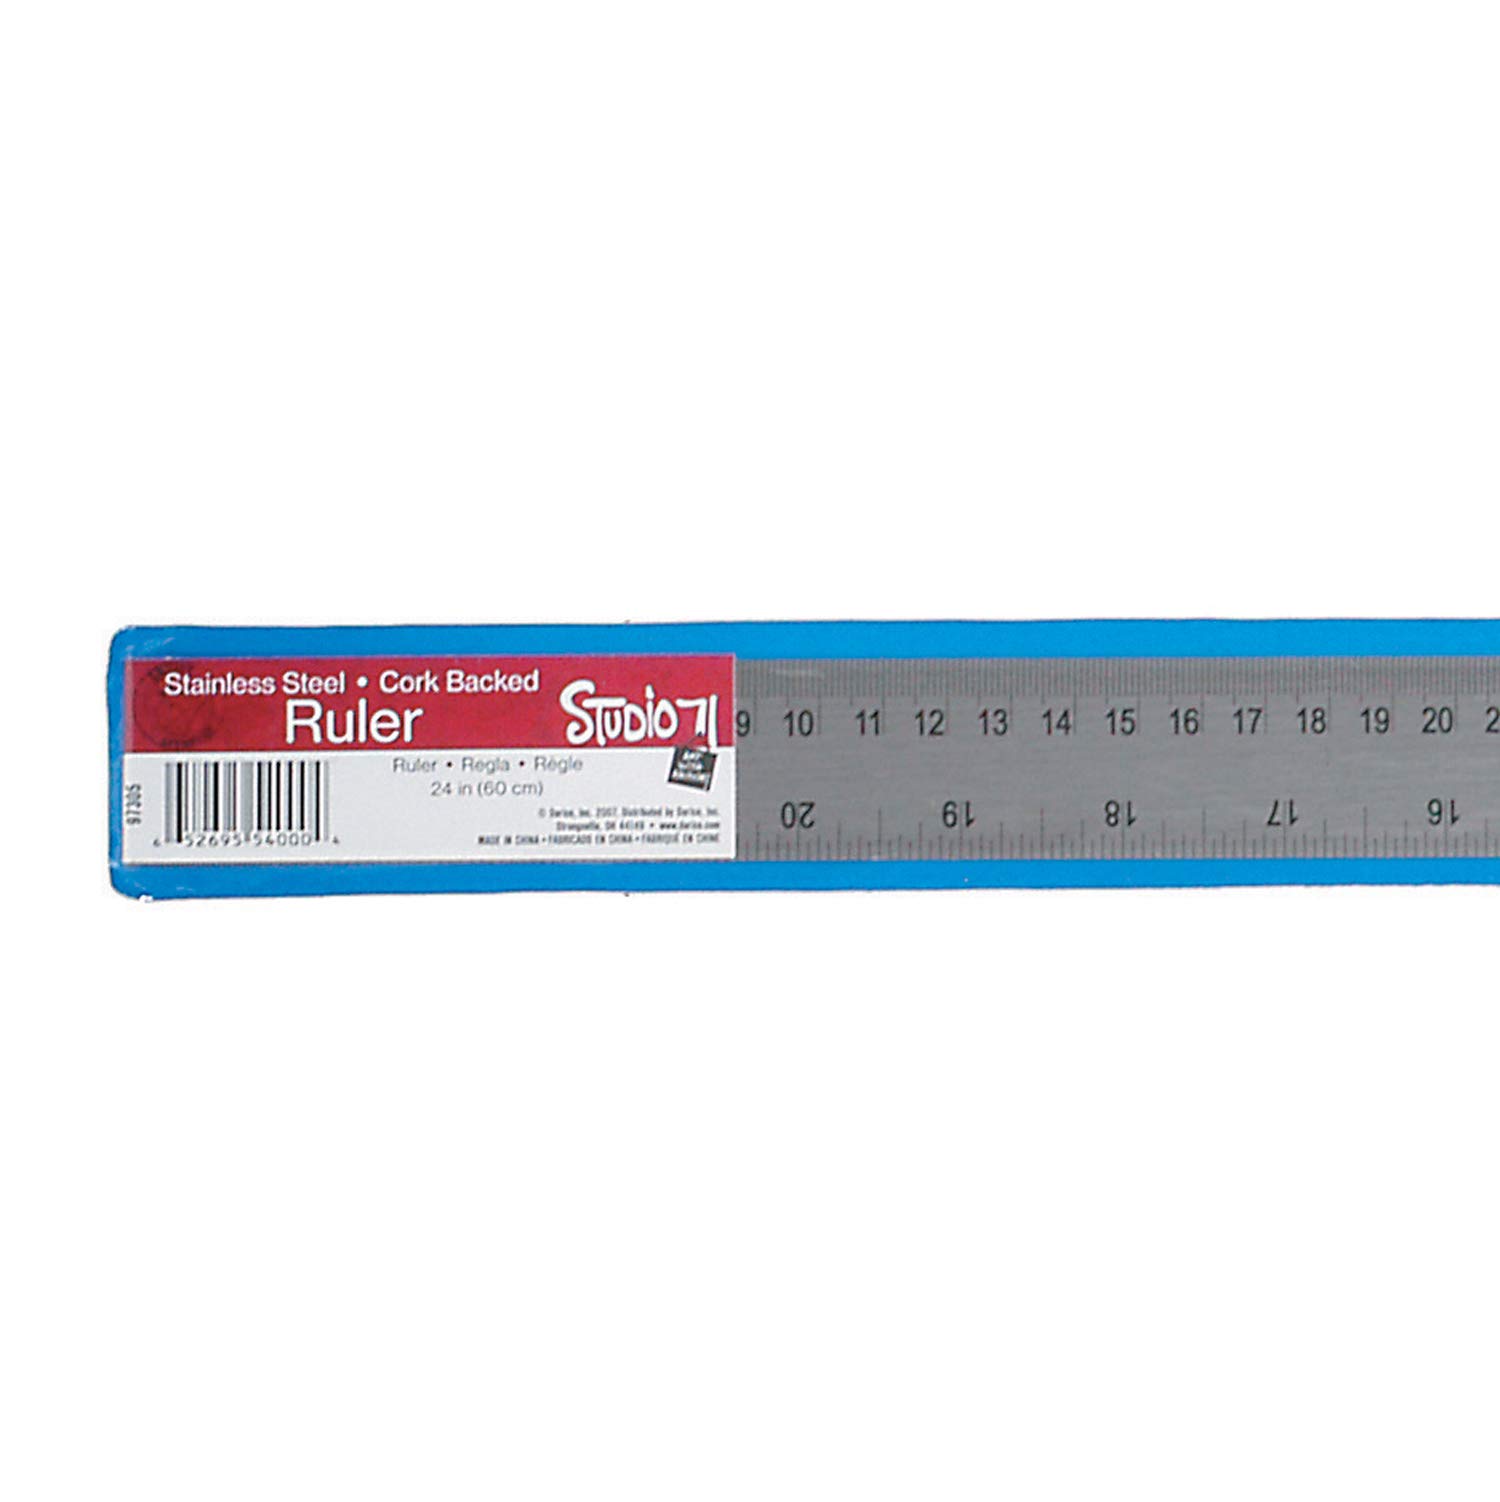 60cm Or 24inch Stainless Steel Long Ruler On Solid White High-Res Stock  Photo - Getty Images